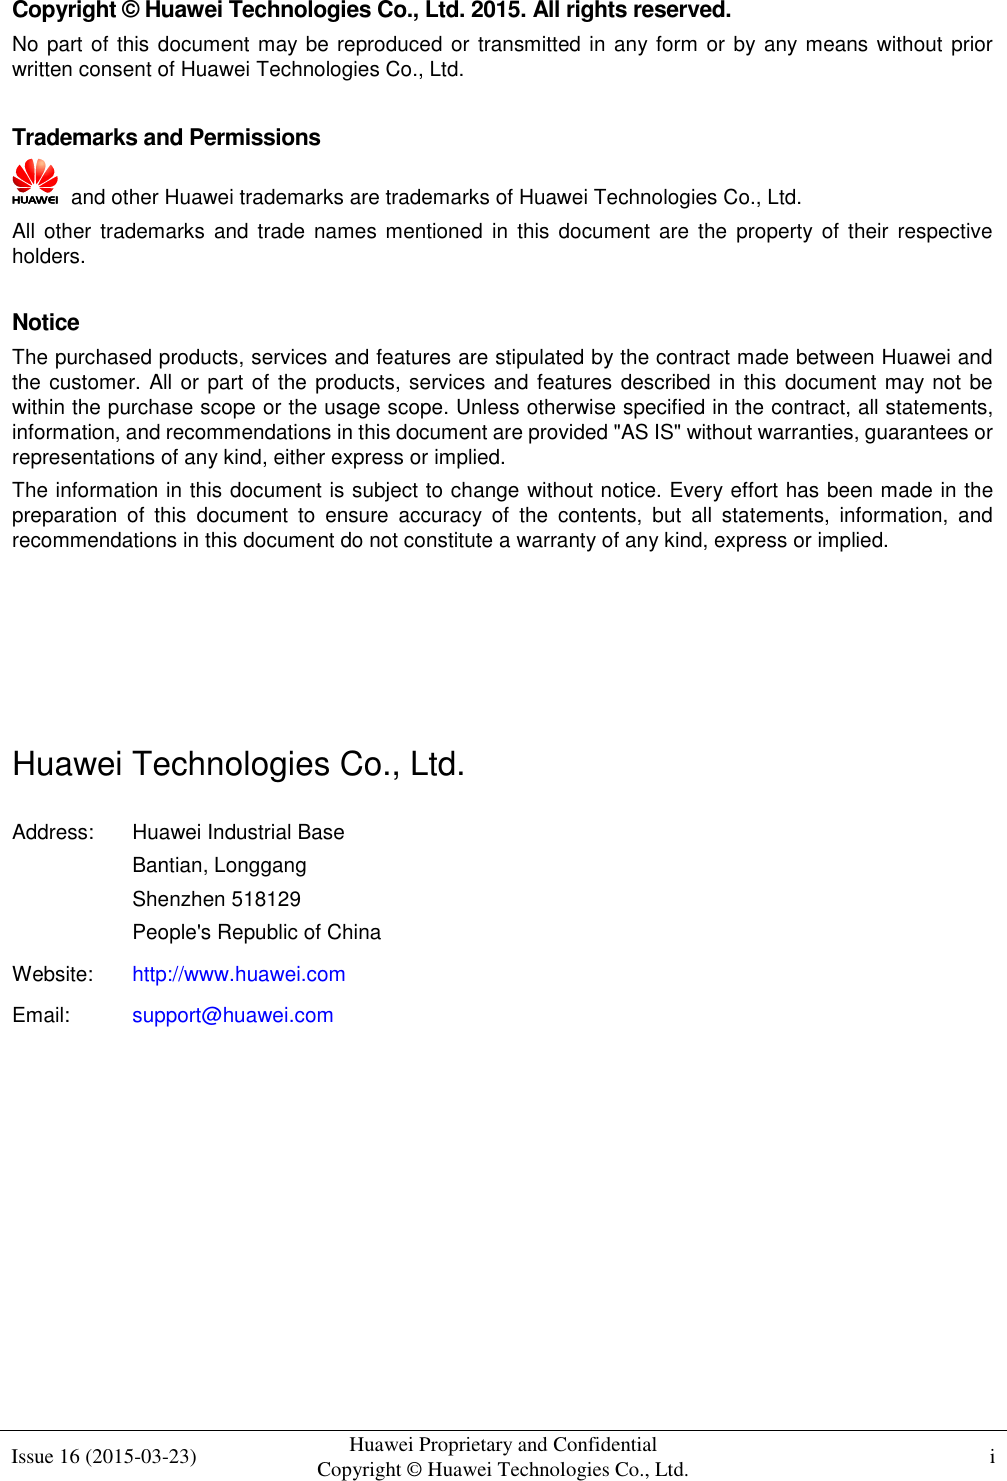  Issue 16 (2015-03-23) Huawei Proprietary and Confidential                                     Copyright © Huawei Technologies Co., Ltd. i    Copyright © Huawei Technologies Co., Ltd. 2015. All rights reserved. No part of this document may be reproduced or transmitted in any form or by any means without prior written consent of Huawei Technologies Co., Ltd.  Trademarks and Permissions   and other Huawei trademarks are trademarks of Huawei Technologies Co., Ltd. All other  trademarks  and  trade  names  mentioned  in  this document are  the  property of  their  respective holders.  Notice The purchased products, services and features are stipulated by the contract made between Huawei and the customer.  All or part of the products, services and features described in this document may not be within the purchase scope or the usage scope. Unless otherwise specified in the contract, all statements, information, and recommendations in this document are provided &quot;AS IS&quot; without warranties, guarantees or representations of any kind, either express or implied. The information in this document is subject to change without notice. Every effort has been made in the preparation  of  this  document  to  ensure  accuracy  of  the  contents,  but  all  statements,  information,  and recommendations in this document do not constitute a warranty of any kind, express or implied.     Huawei Technologies Co., Ltd. Address: Huawei Industrial Base Bantian, Longgang Shenzhen 518129 People&apos;s Republic of China Website: http://www.huawei.com Email: support@huawei.com          